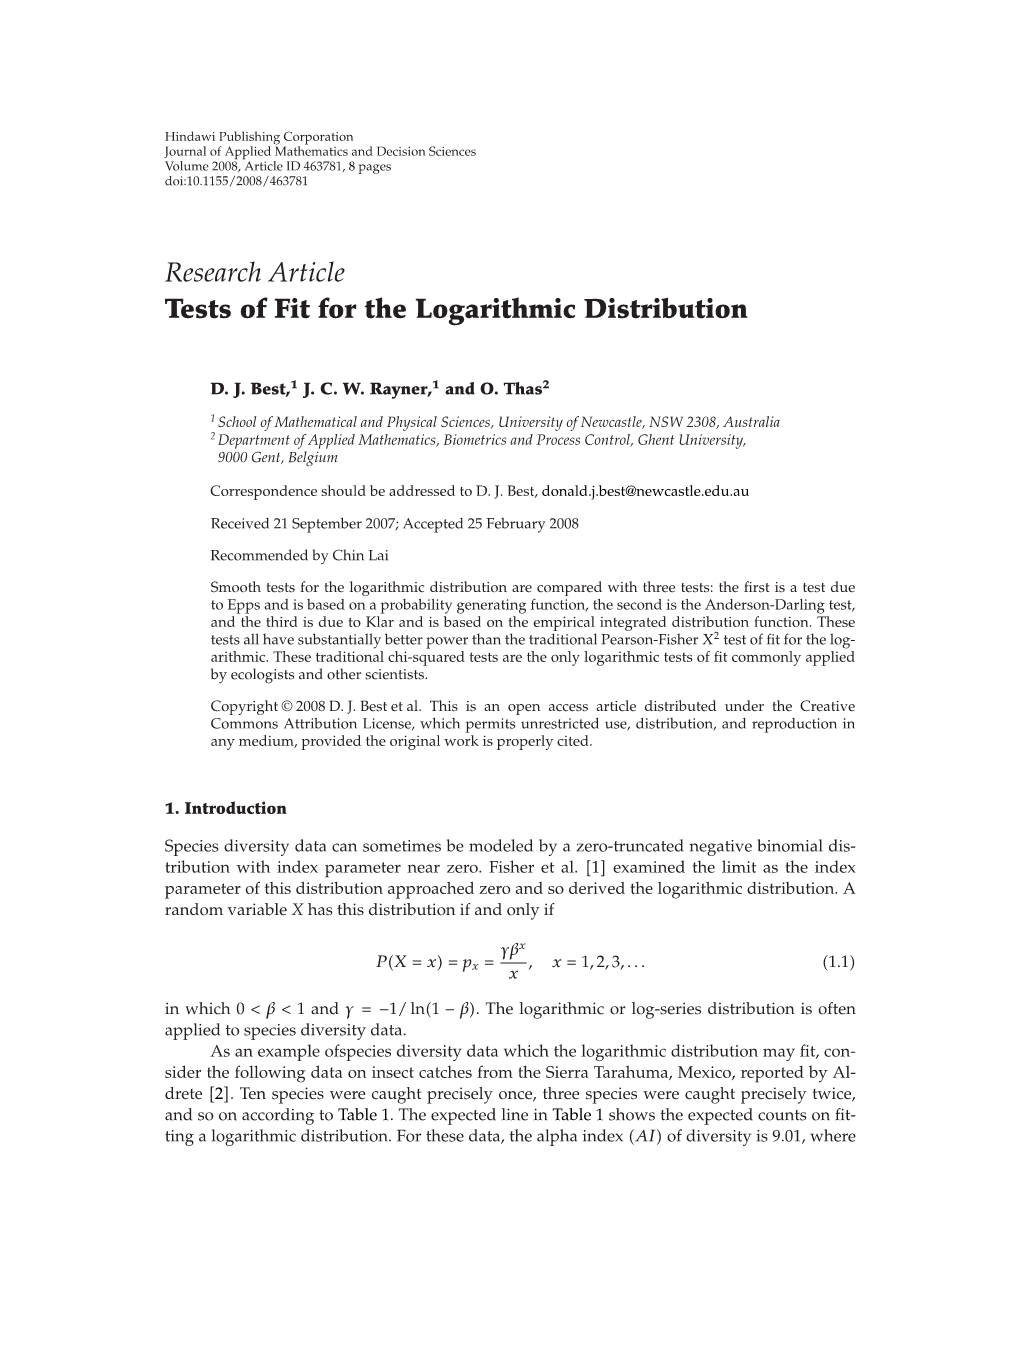 Tests of Fit for the Logarithmic Distribution